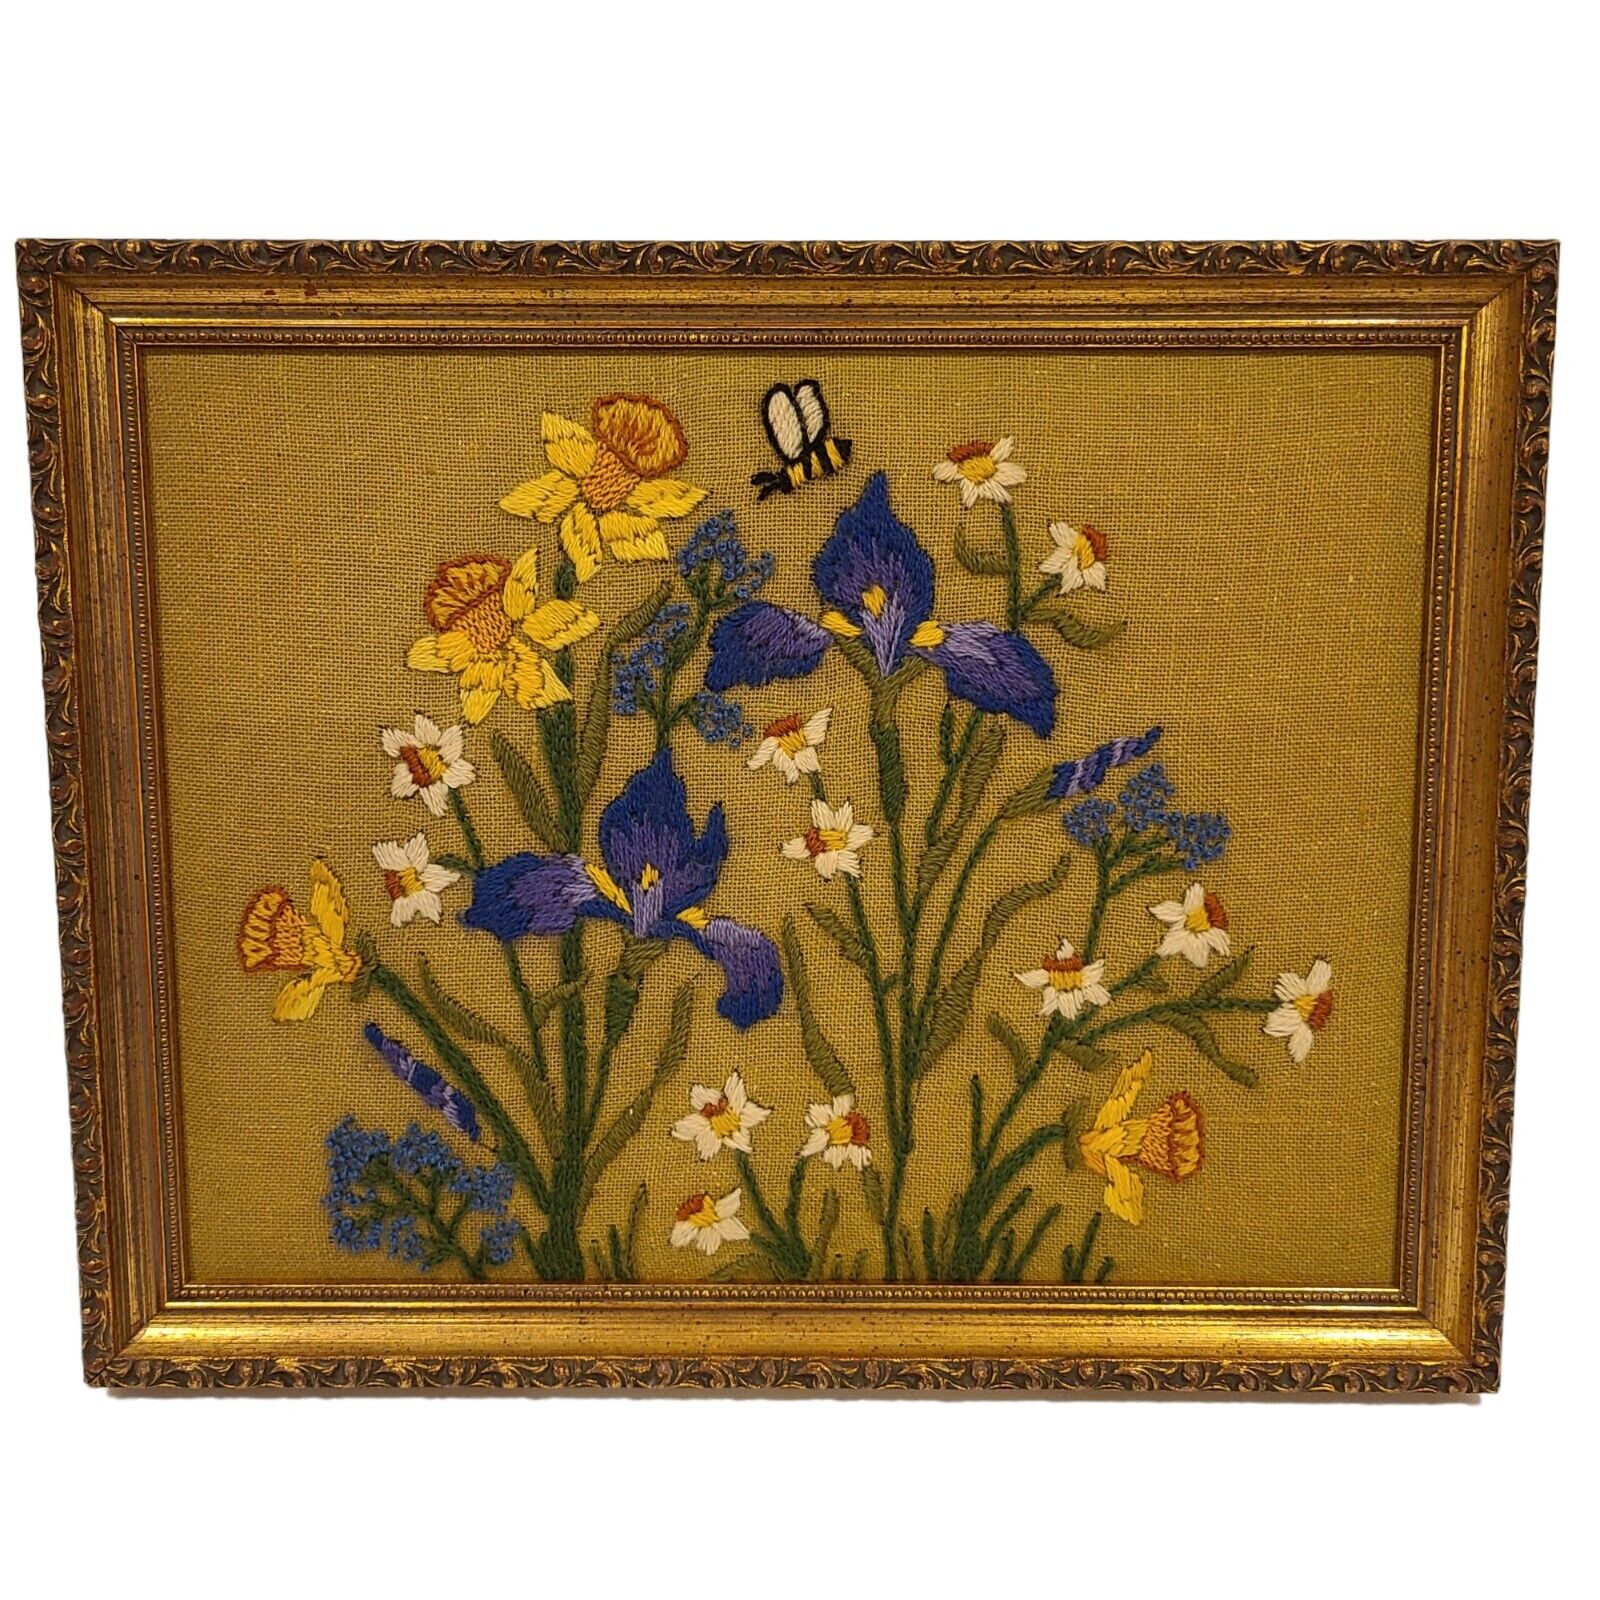 Vintage 70s Crewel Embroidery Floral Flowers Bee Ornate Gold Framed Wall Art